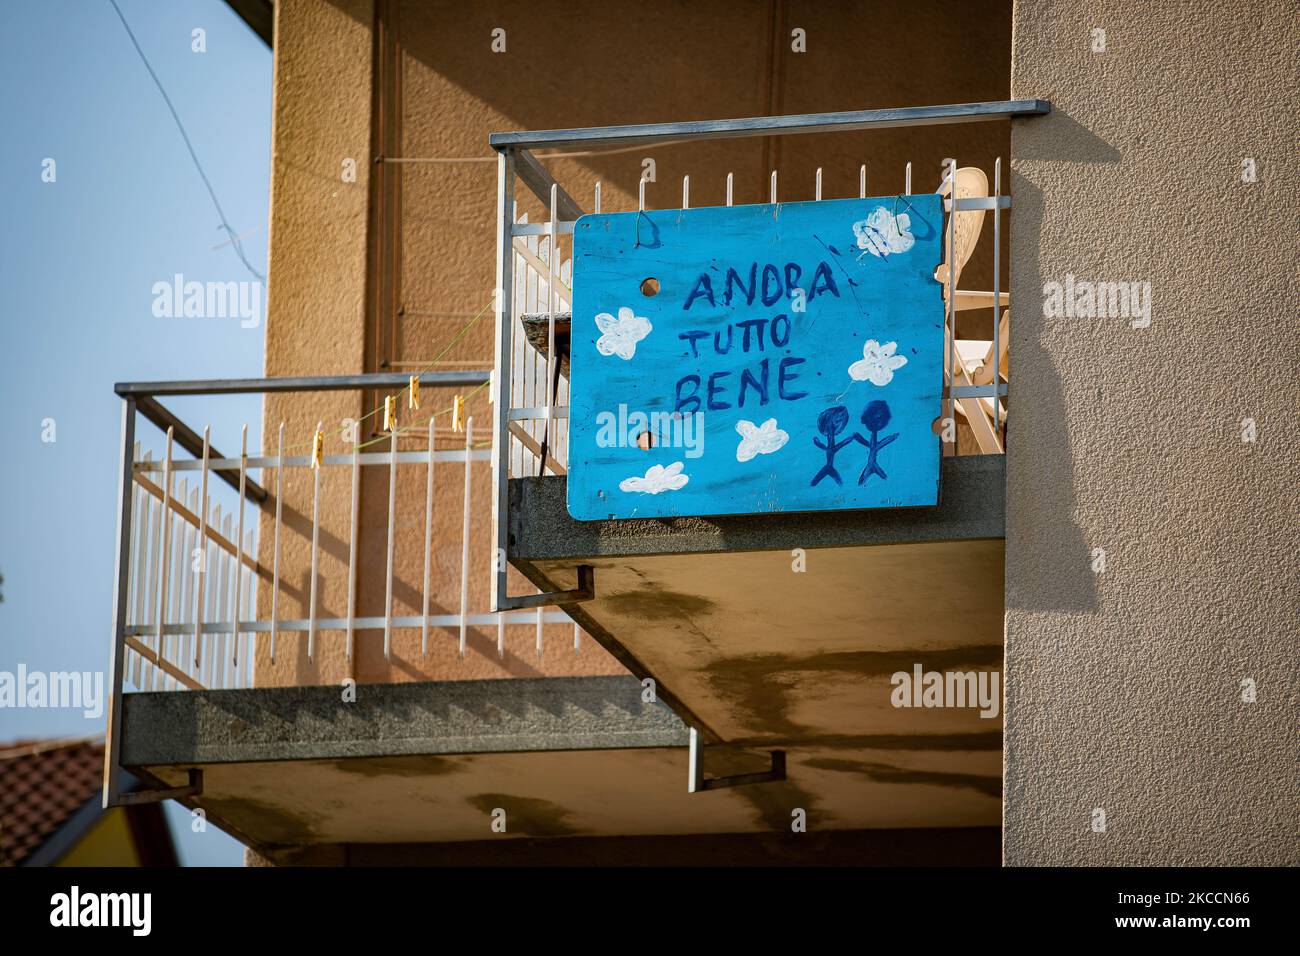 General view of Andrà Tutto Bene sign and banner during the Covid-19 pandemic on April 02, 2021 in Bergamo, Italy. (Photo by Alessandro Bremec/NurPhoto) Stock Photo